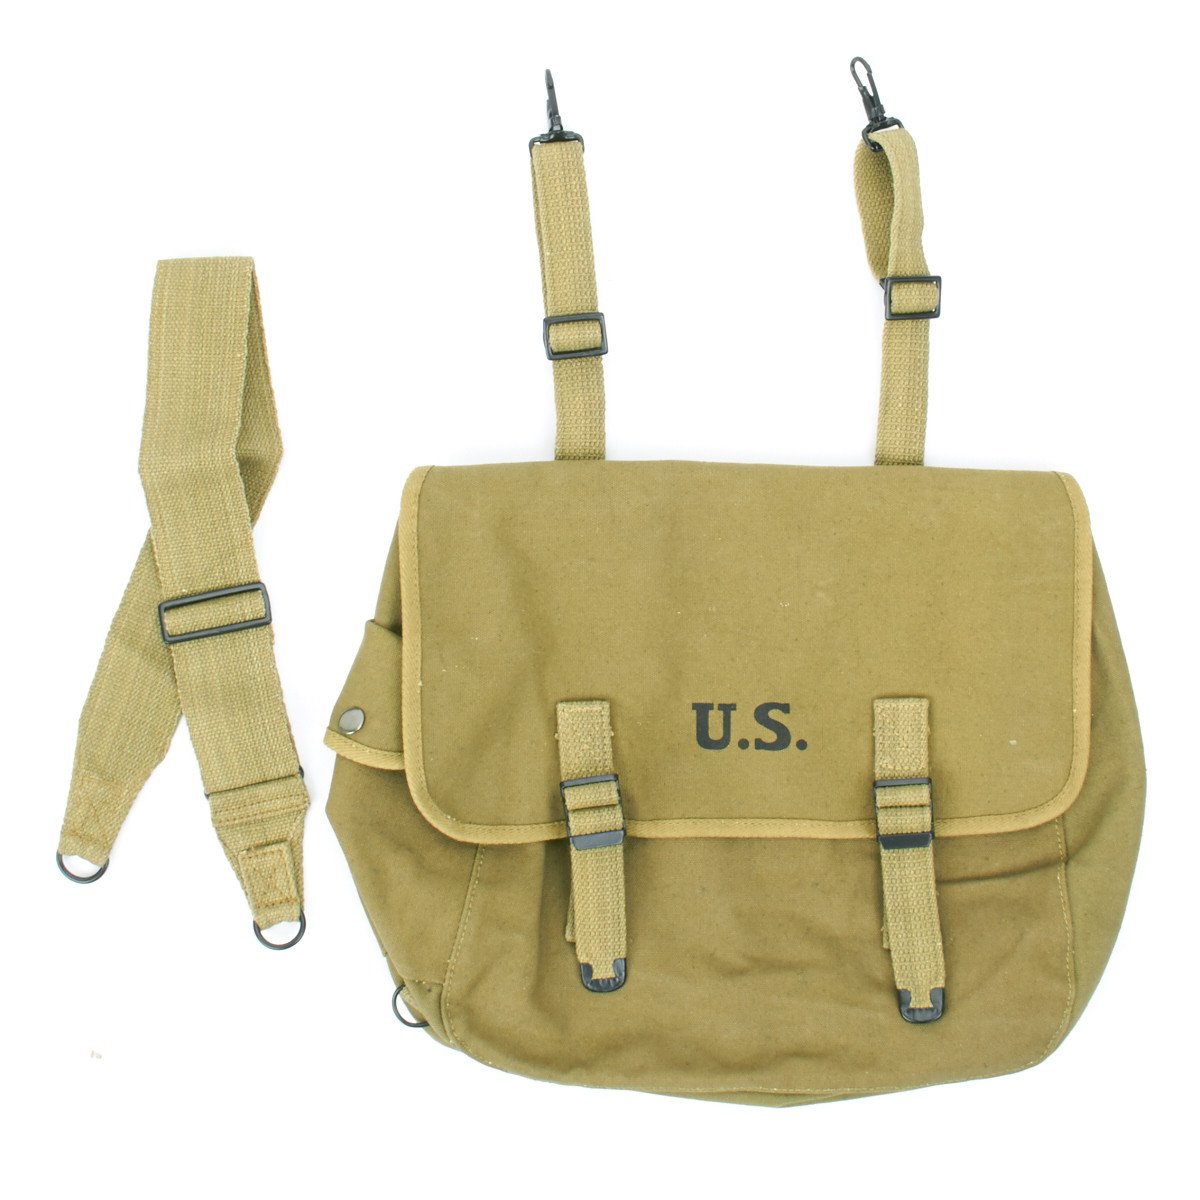 Ww2 Us M1936 Musette Bag Army Field Pack Canvas Backpack with Shoulder  Strap - China Army Bag and Wwi Military Bag price